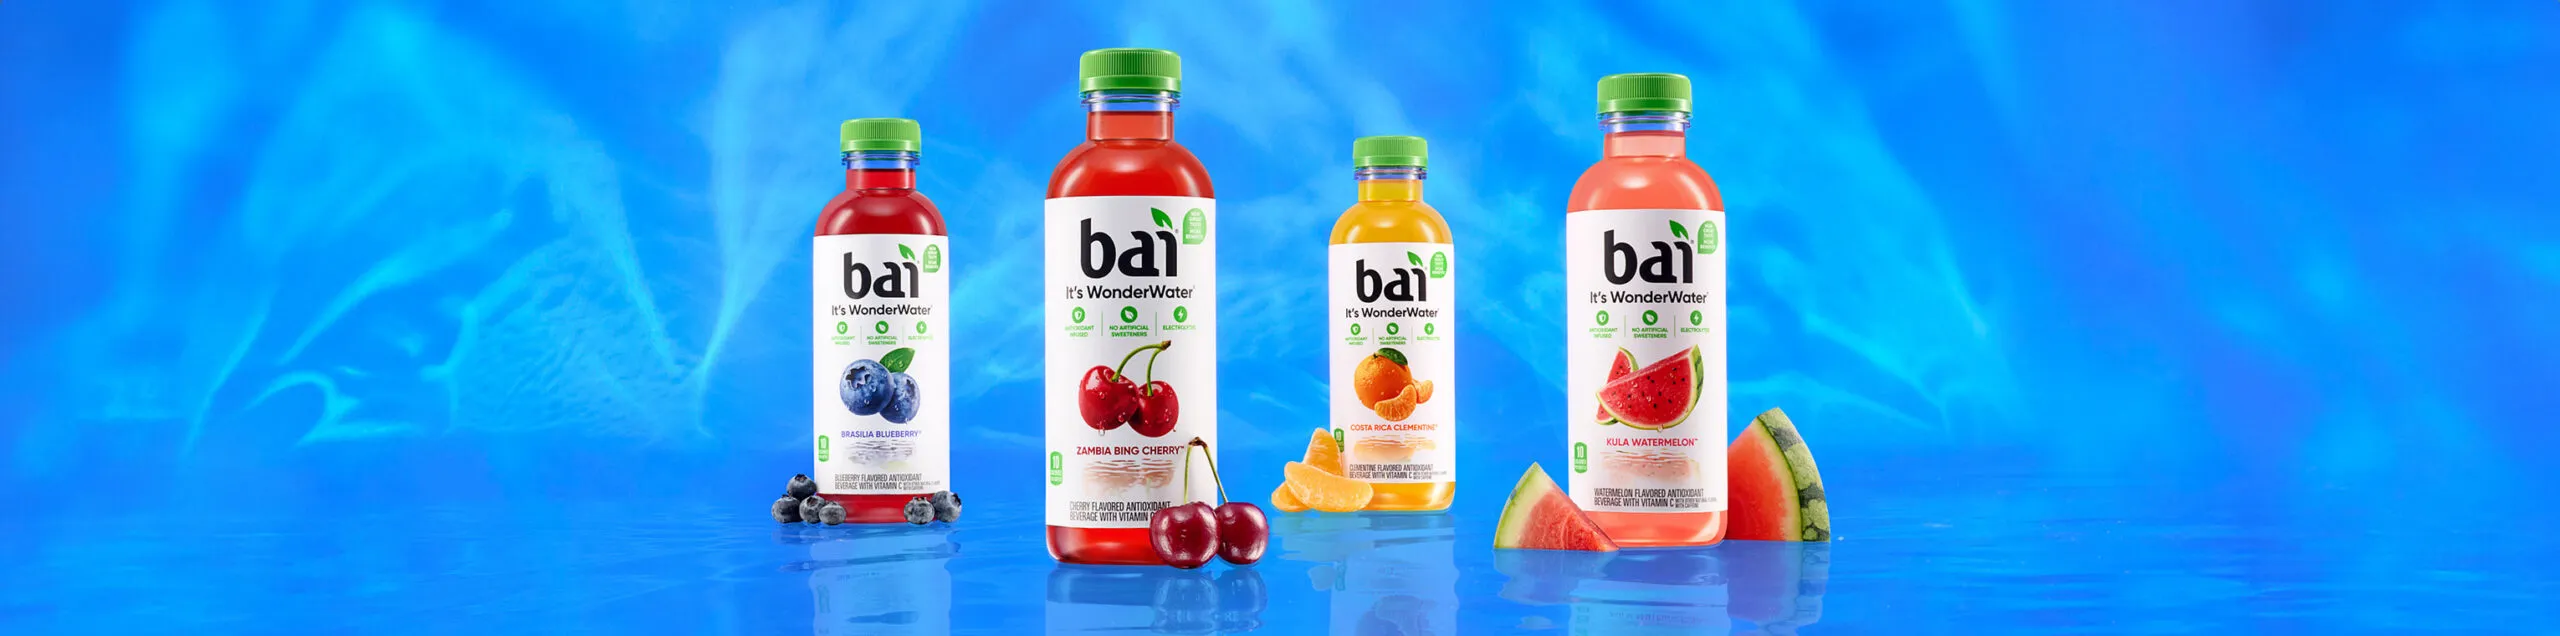 Bai® Flavors Variety Pack (Available on Amazon)